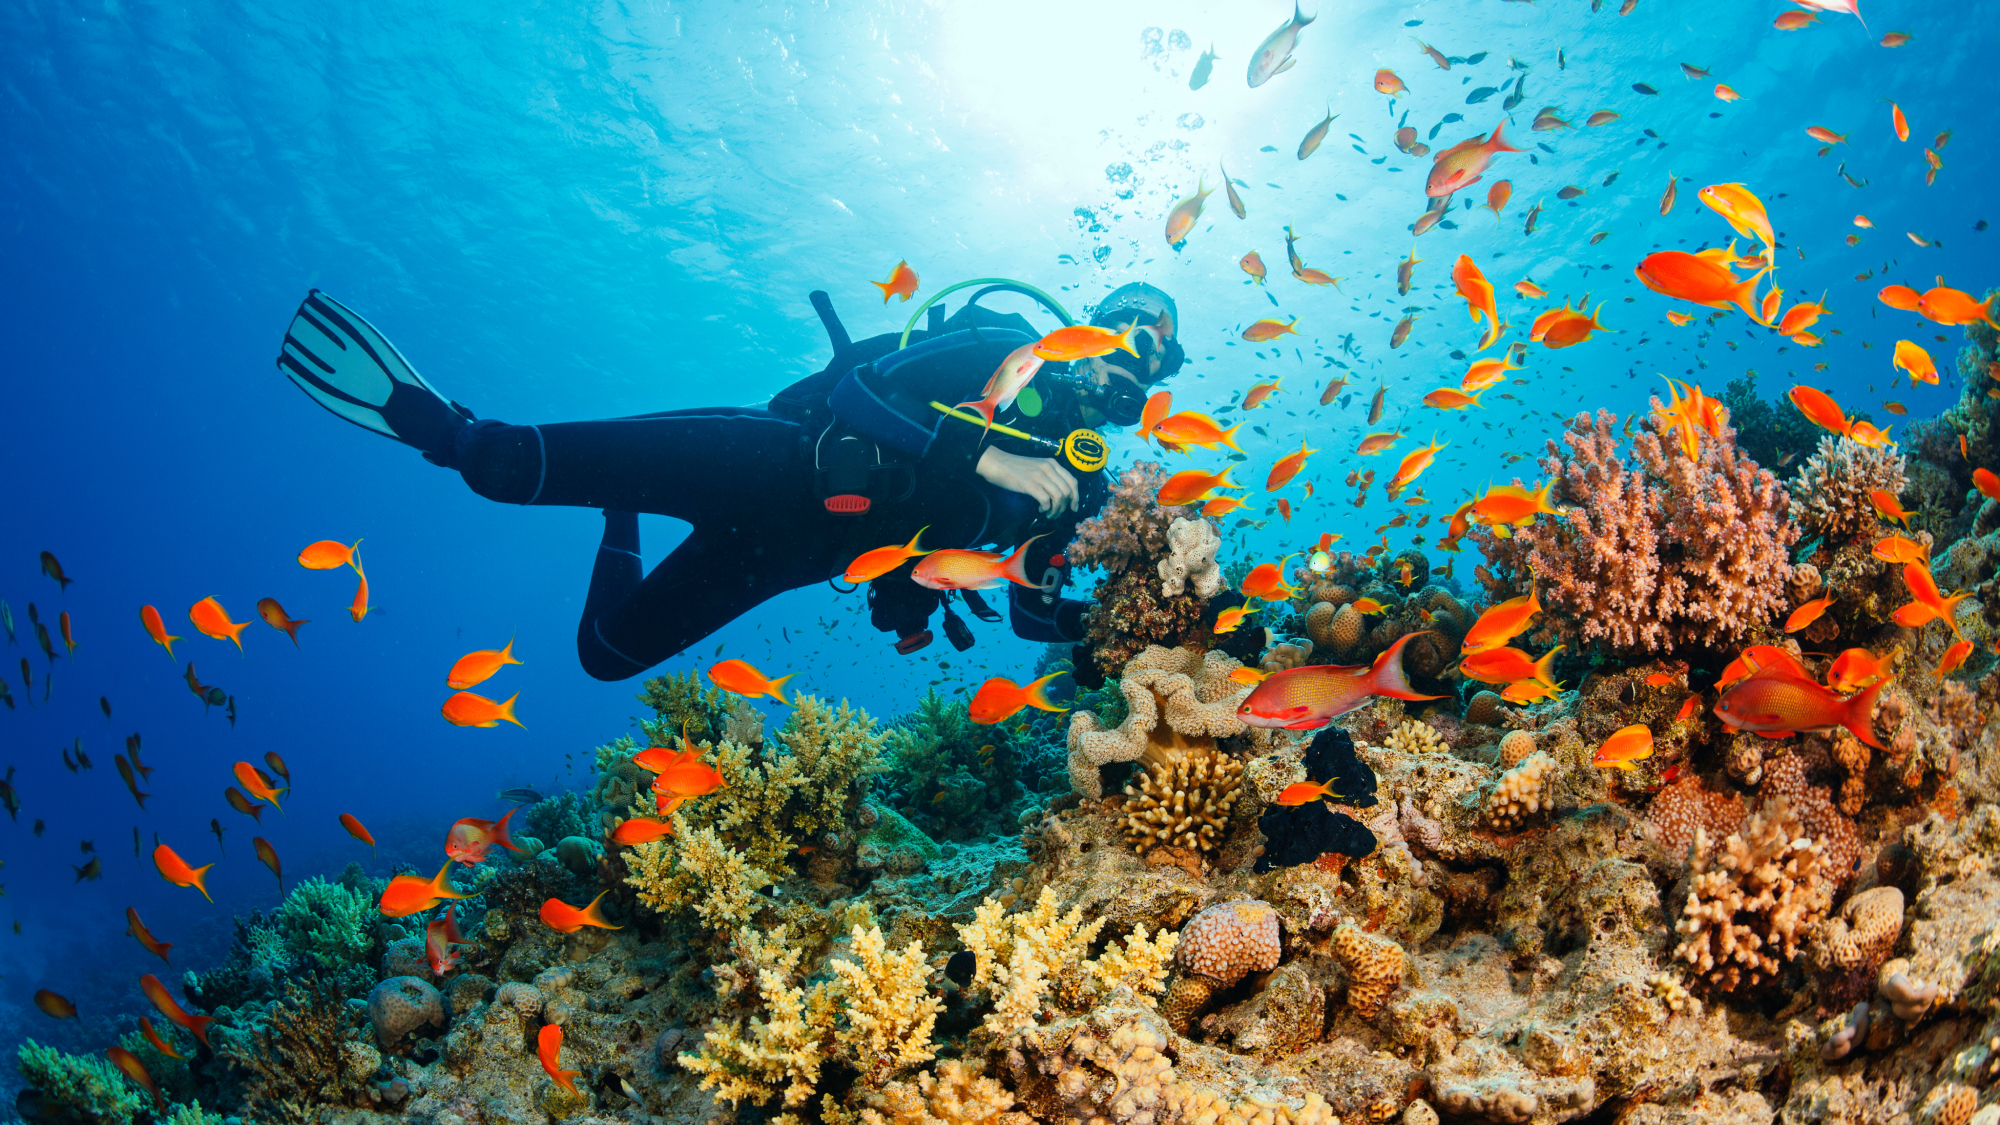 Diver in coral reef surrounded by orange fish